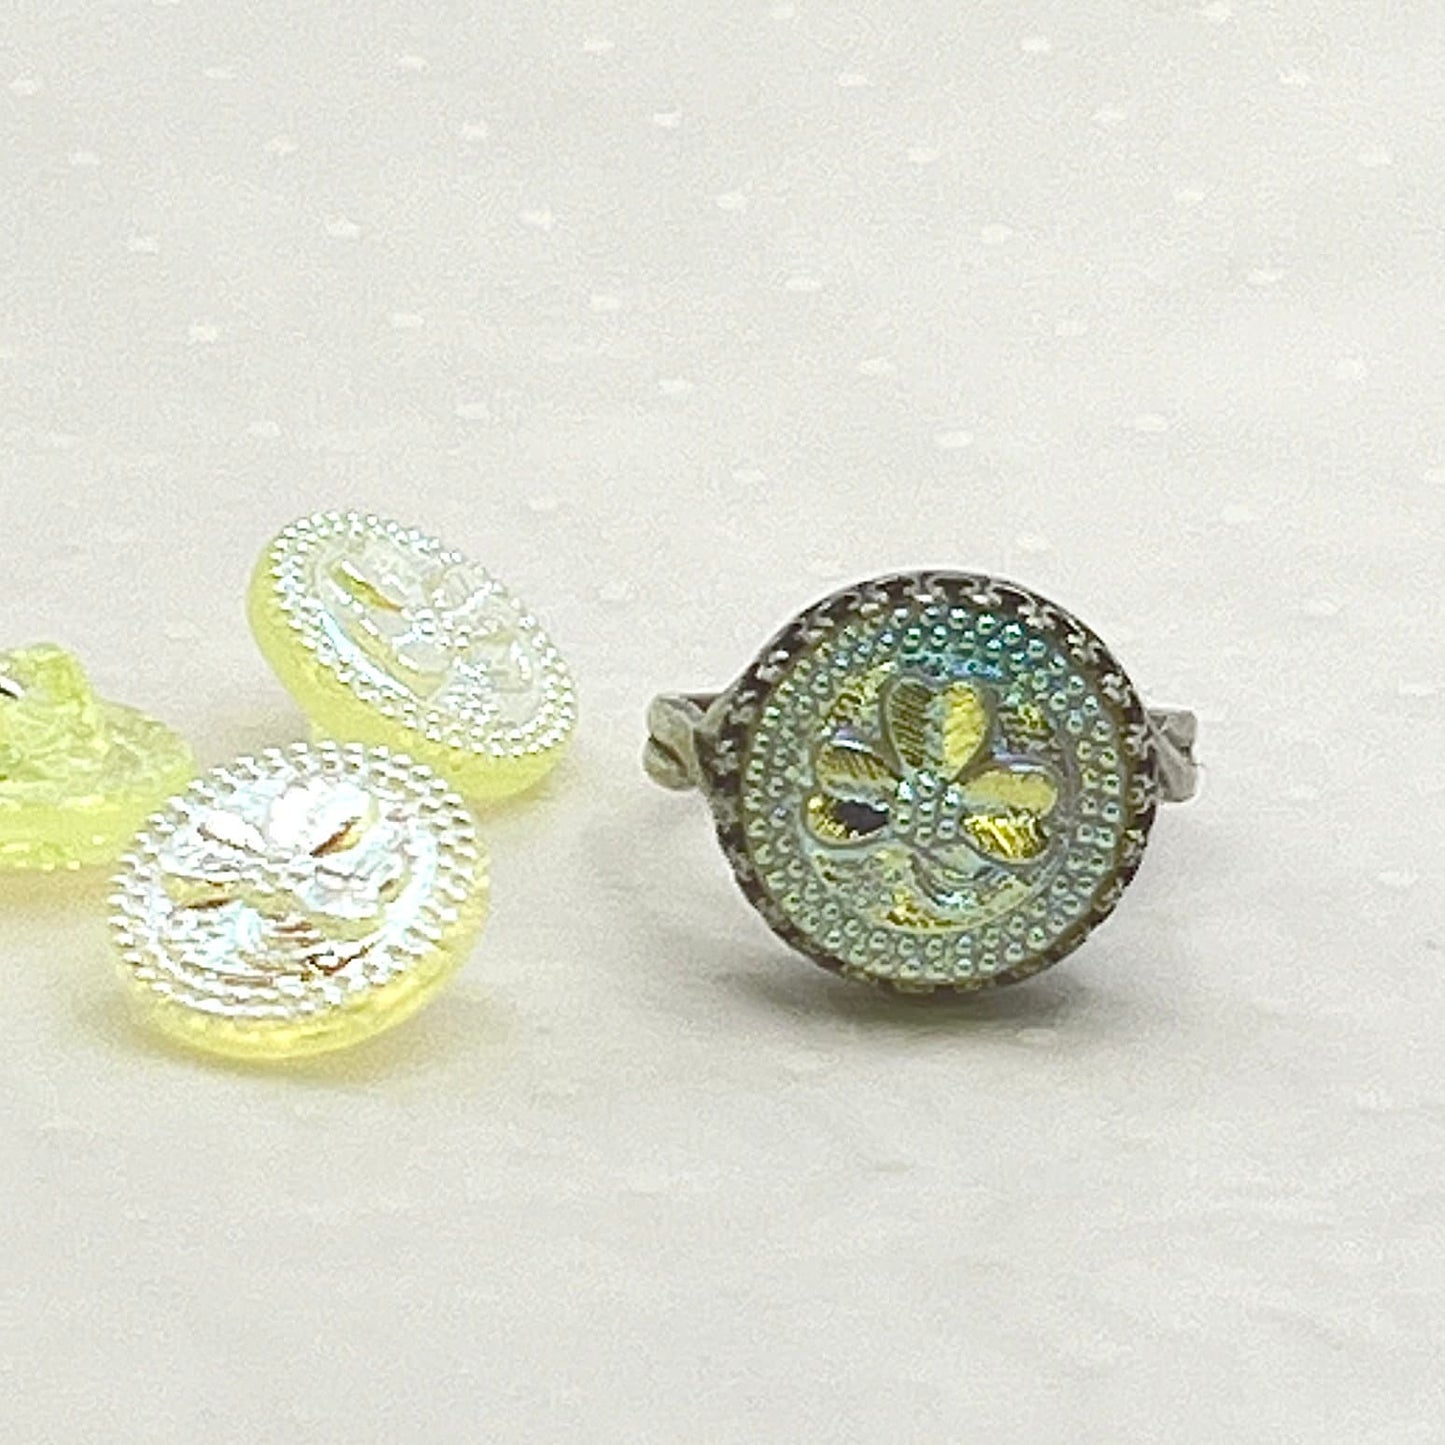 Button Jewelry, Unique Gifts for Women, Sterling Silver Adjustable Ring, St Patricks Day, Uraniam Glass